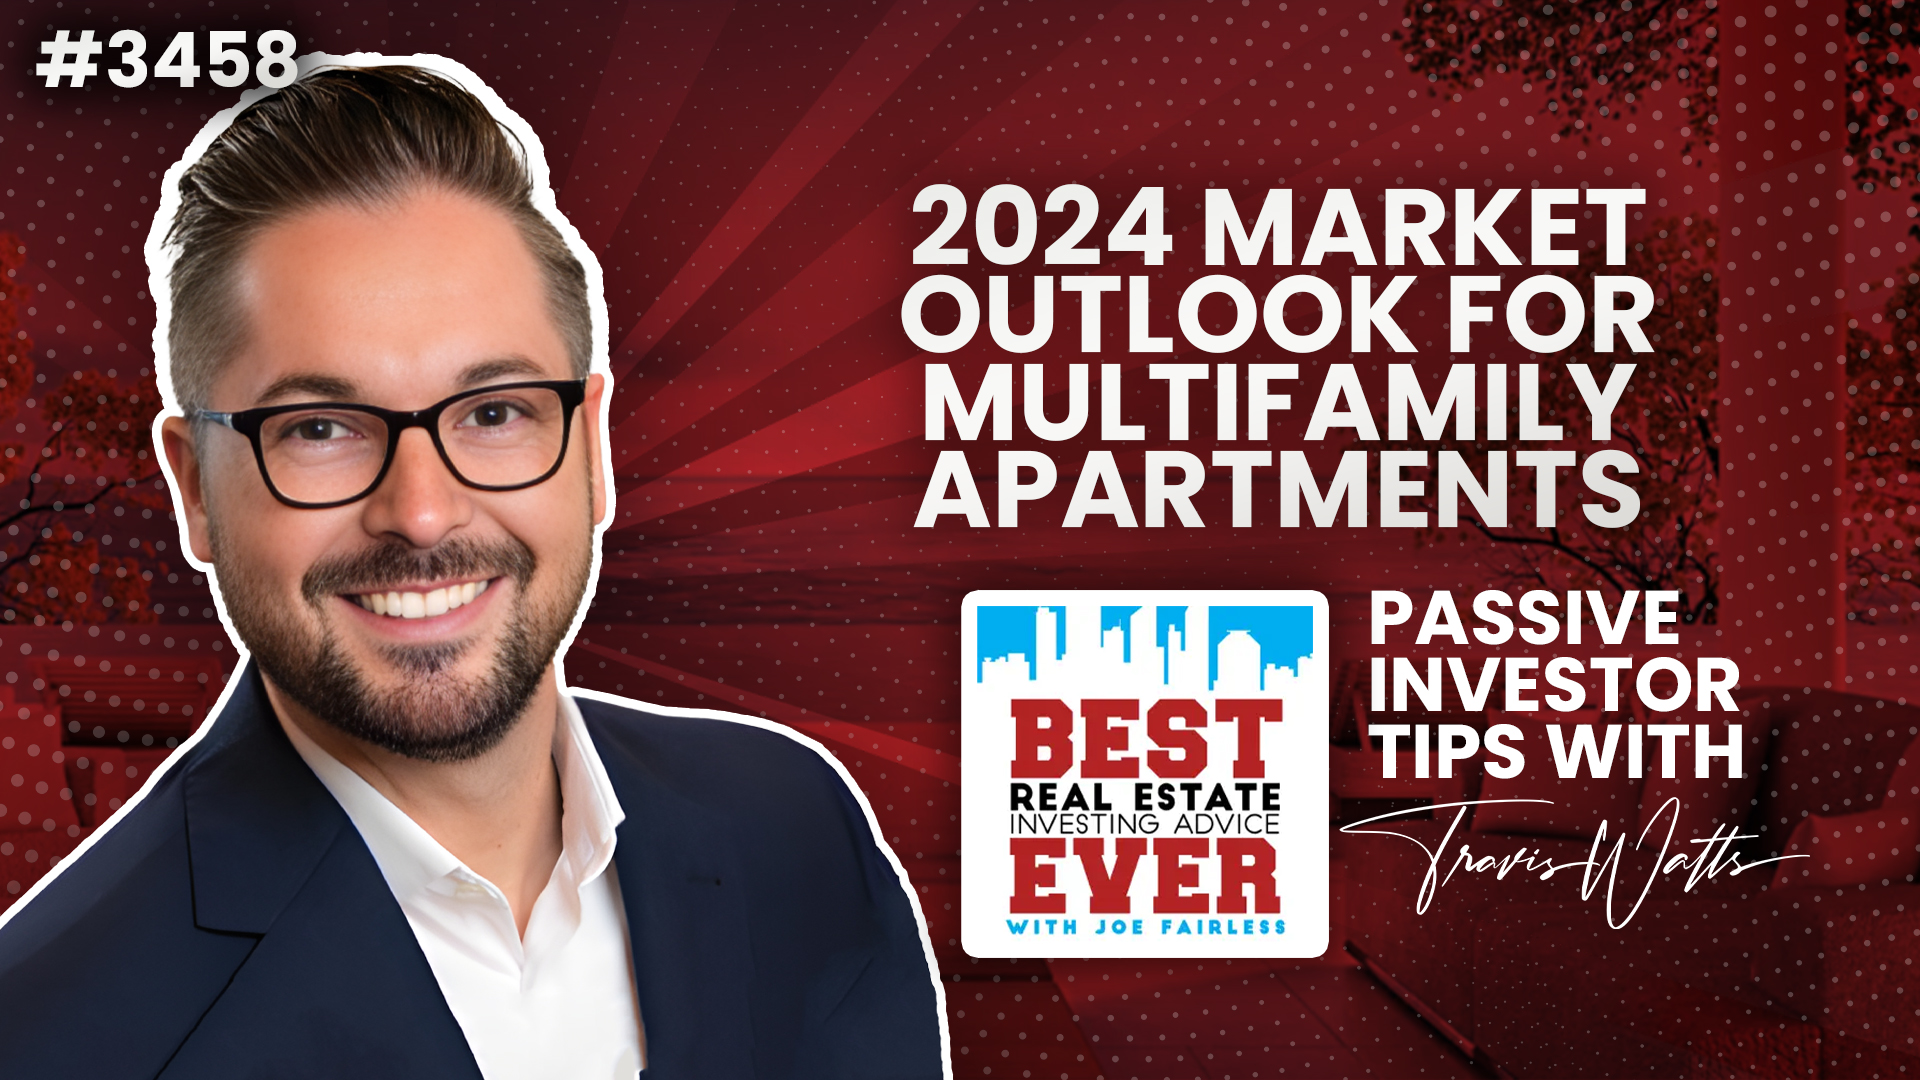 JF3458: 2024 Market Outlook for Multifamily Apartments | Passive Investor Tips ft. Travis Watts